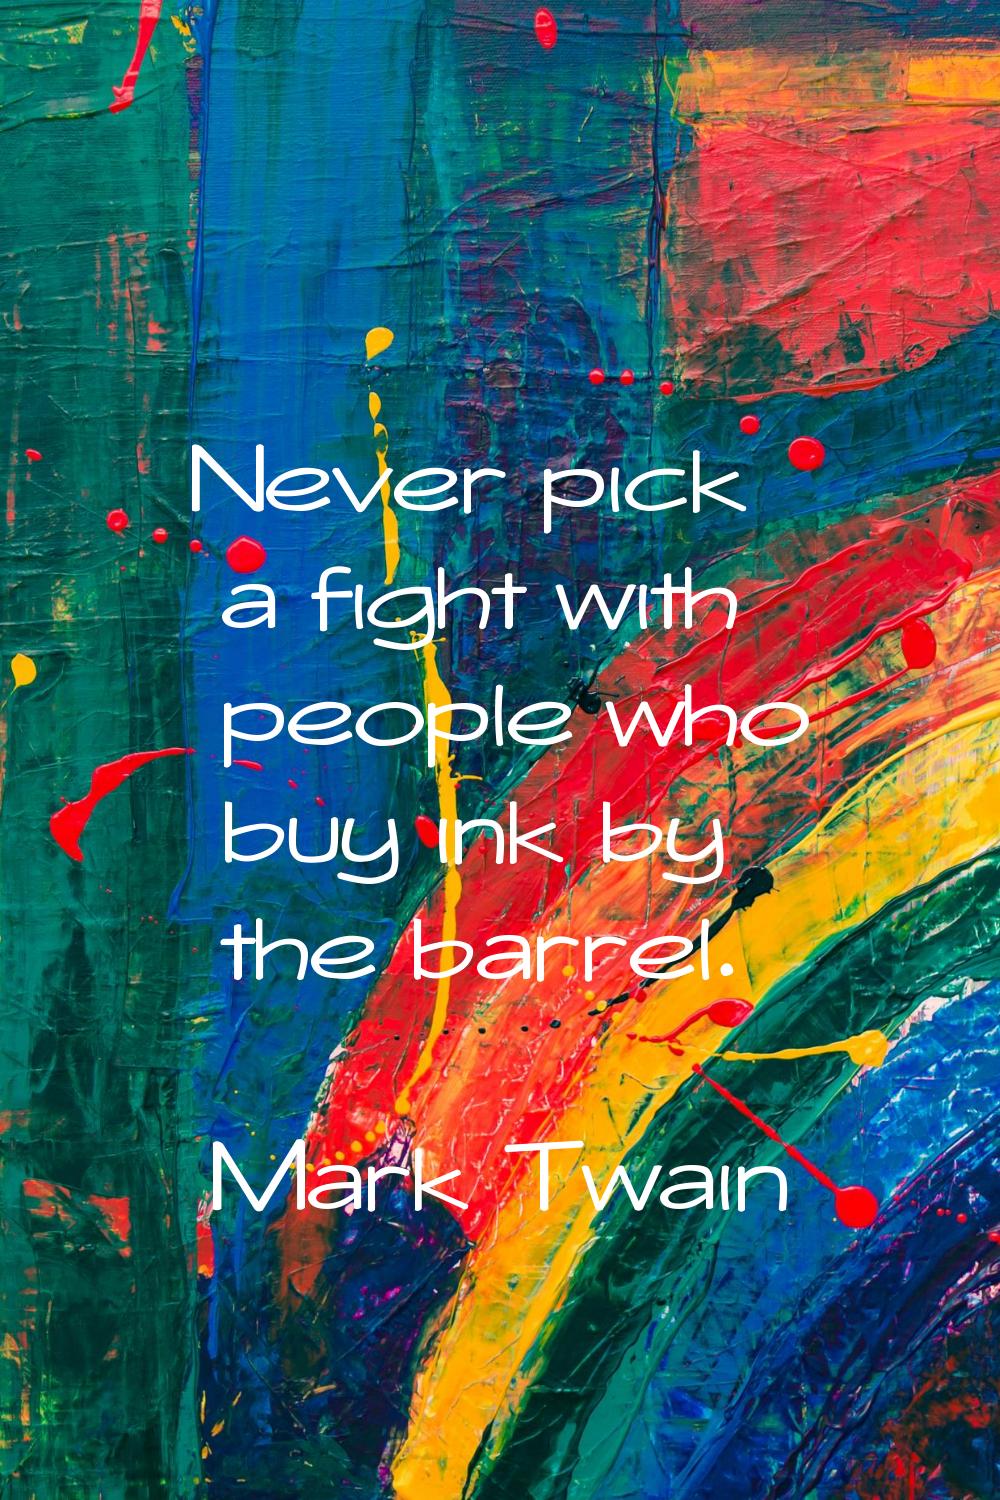 Never pick a fight with people who buy ink by the barrel.